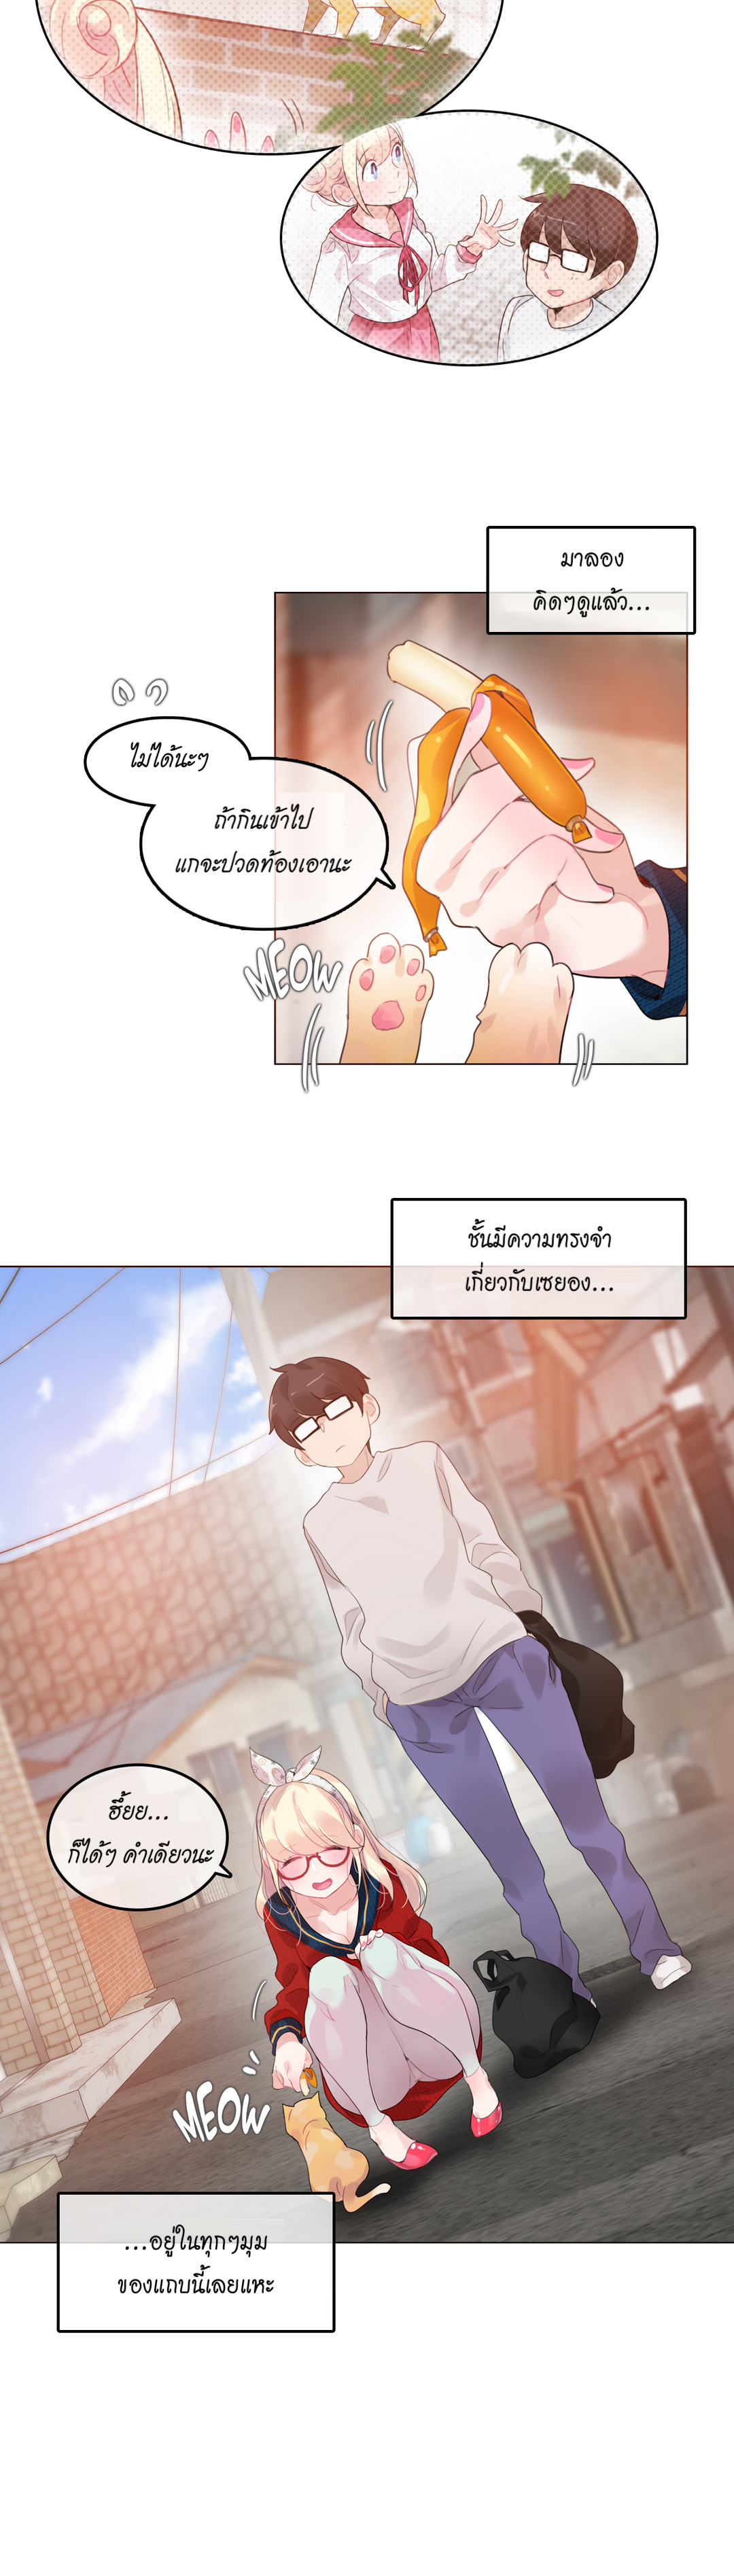 A Pervert’s Daily Life54 (18)